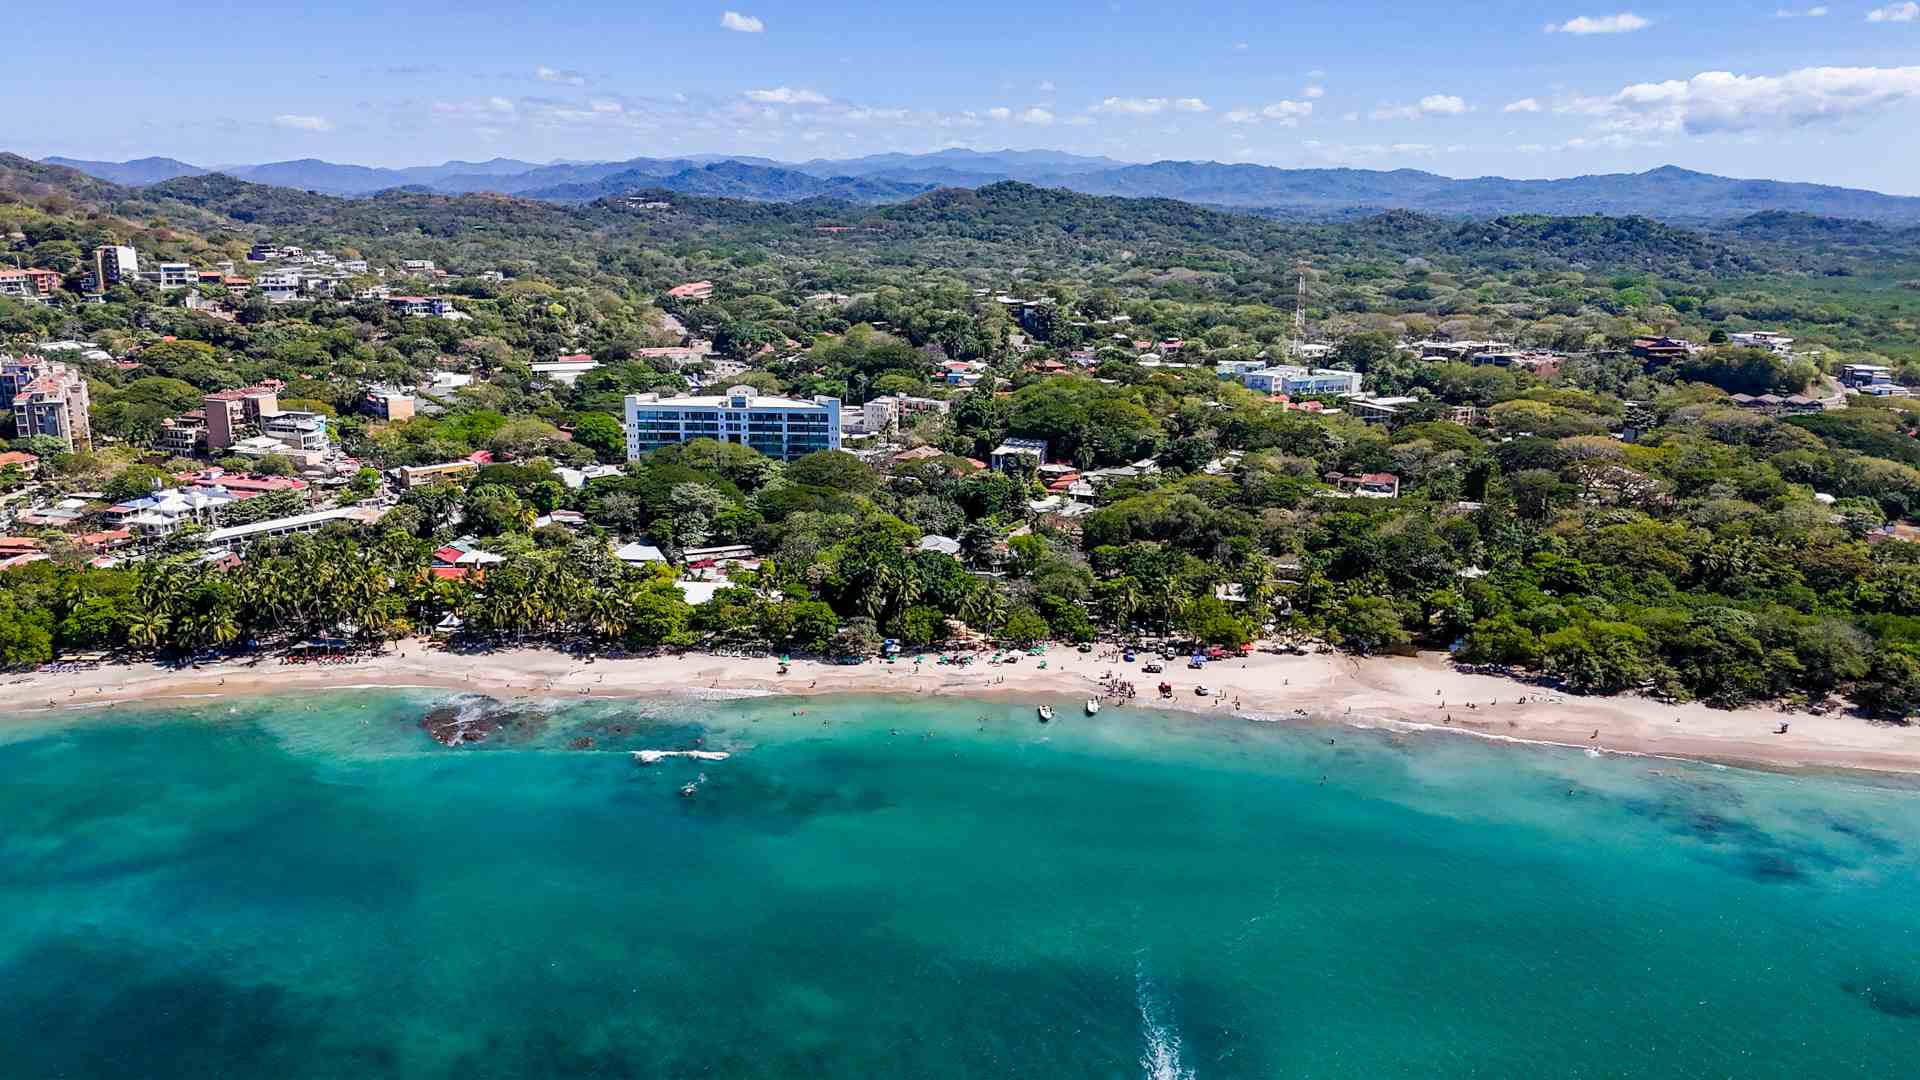 Thanks to nest you can find the best Costa Rica homes for sale on the beach